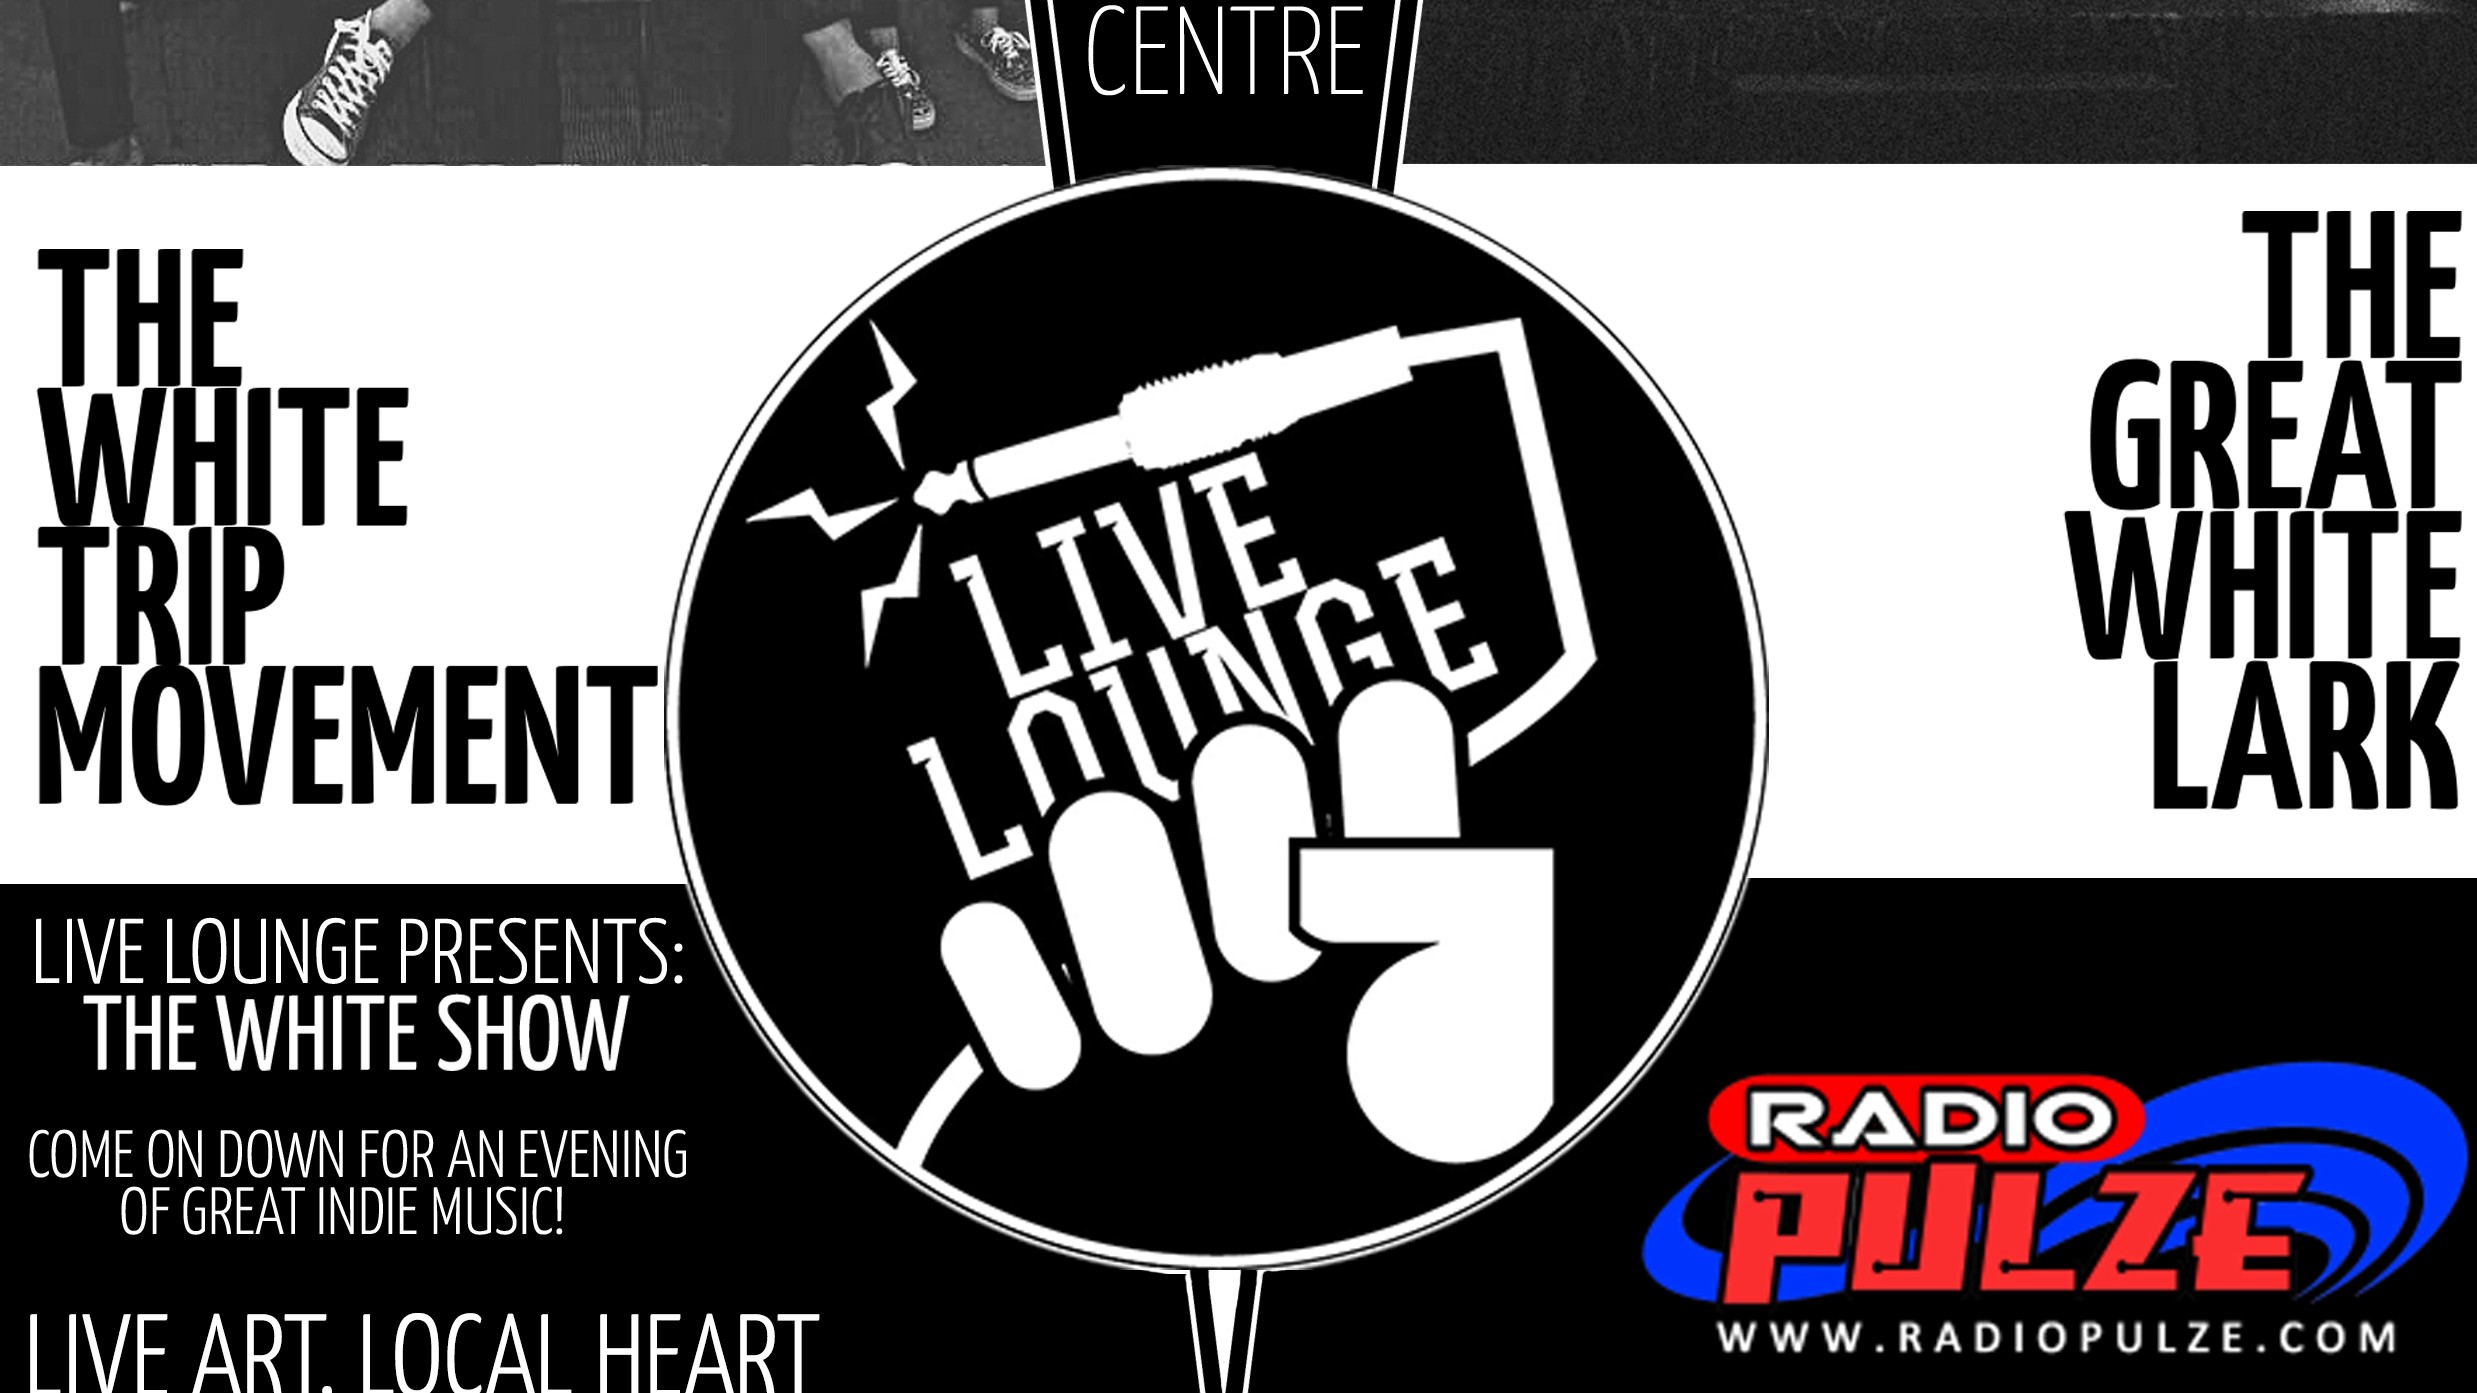 LIVE LOUNGE | SHOW TWO [The Great White Lark, The White Trip Movement]